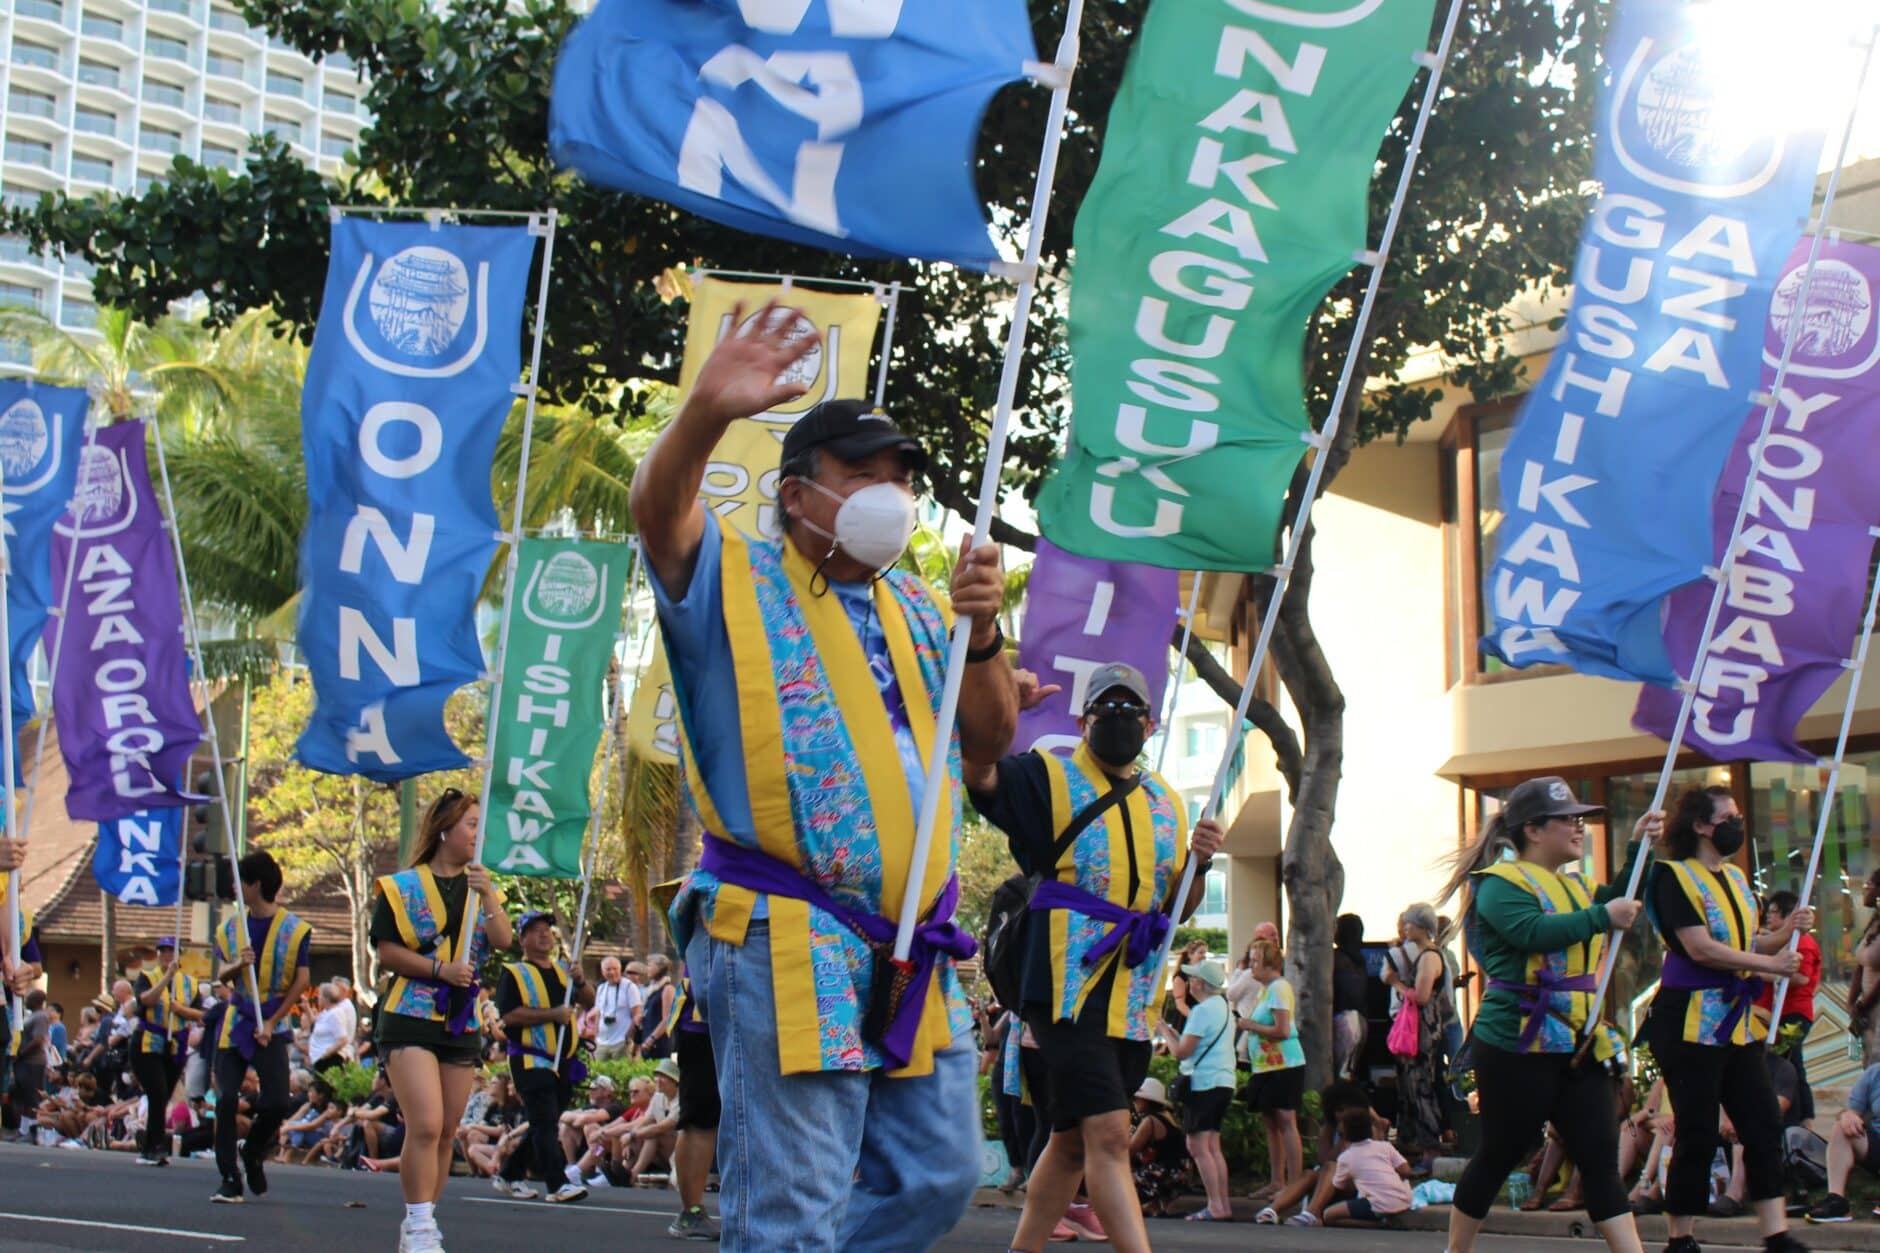 Hawaii and Japan reestablish connection with weekend cultural festival